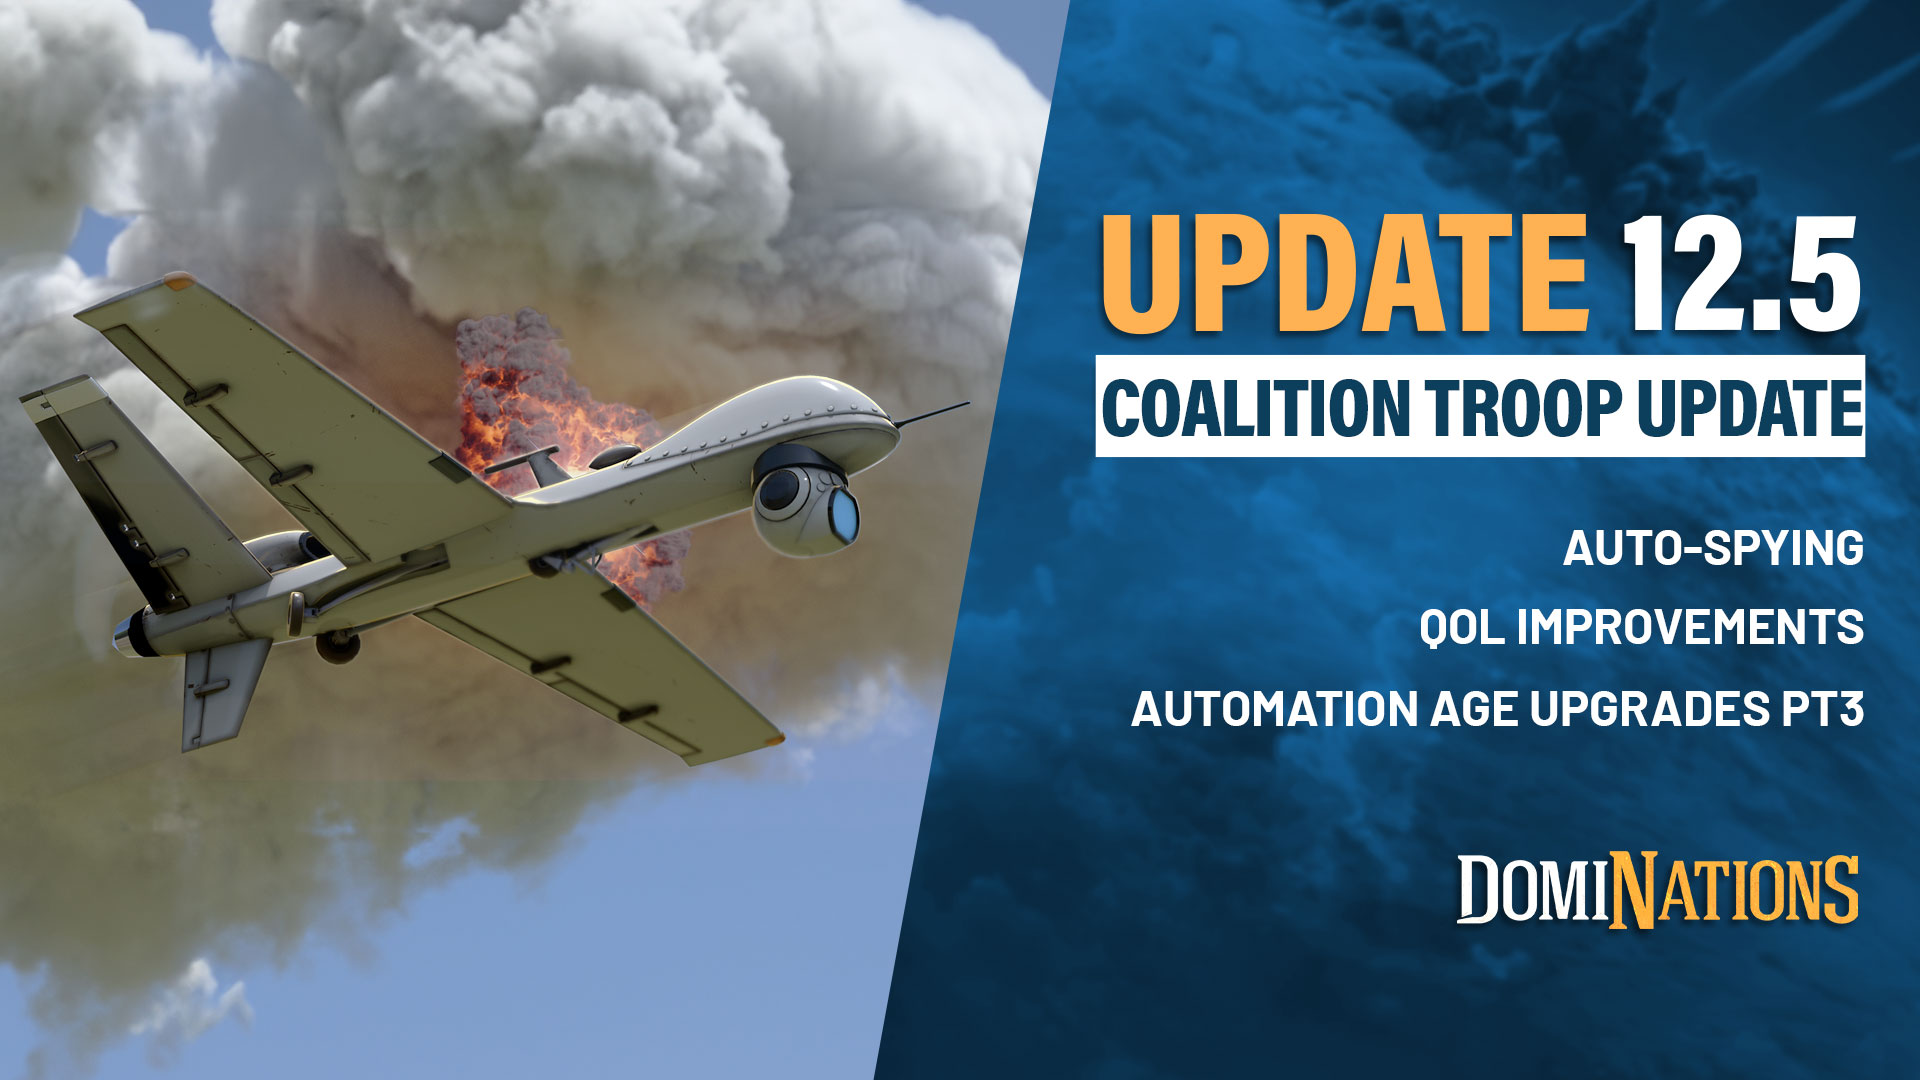 DomiNations Update 12.5 - Coalition Troop Update and Auto-Spying!